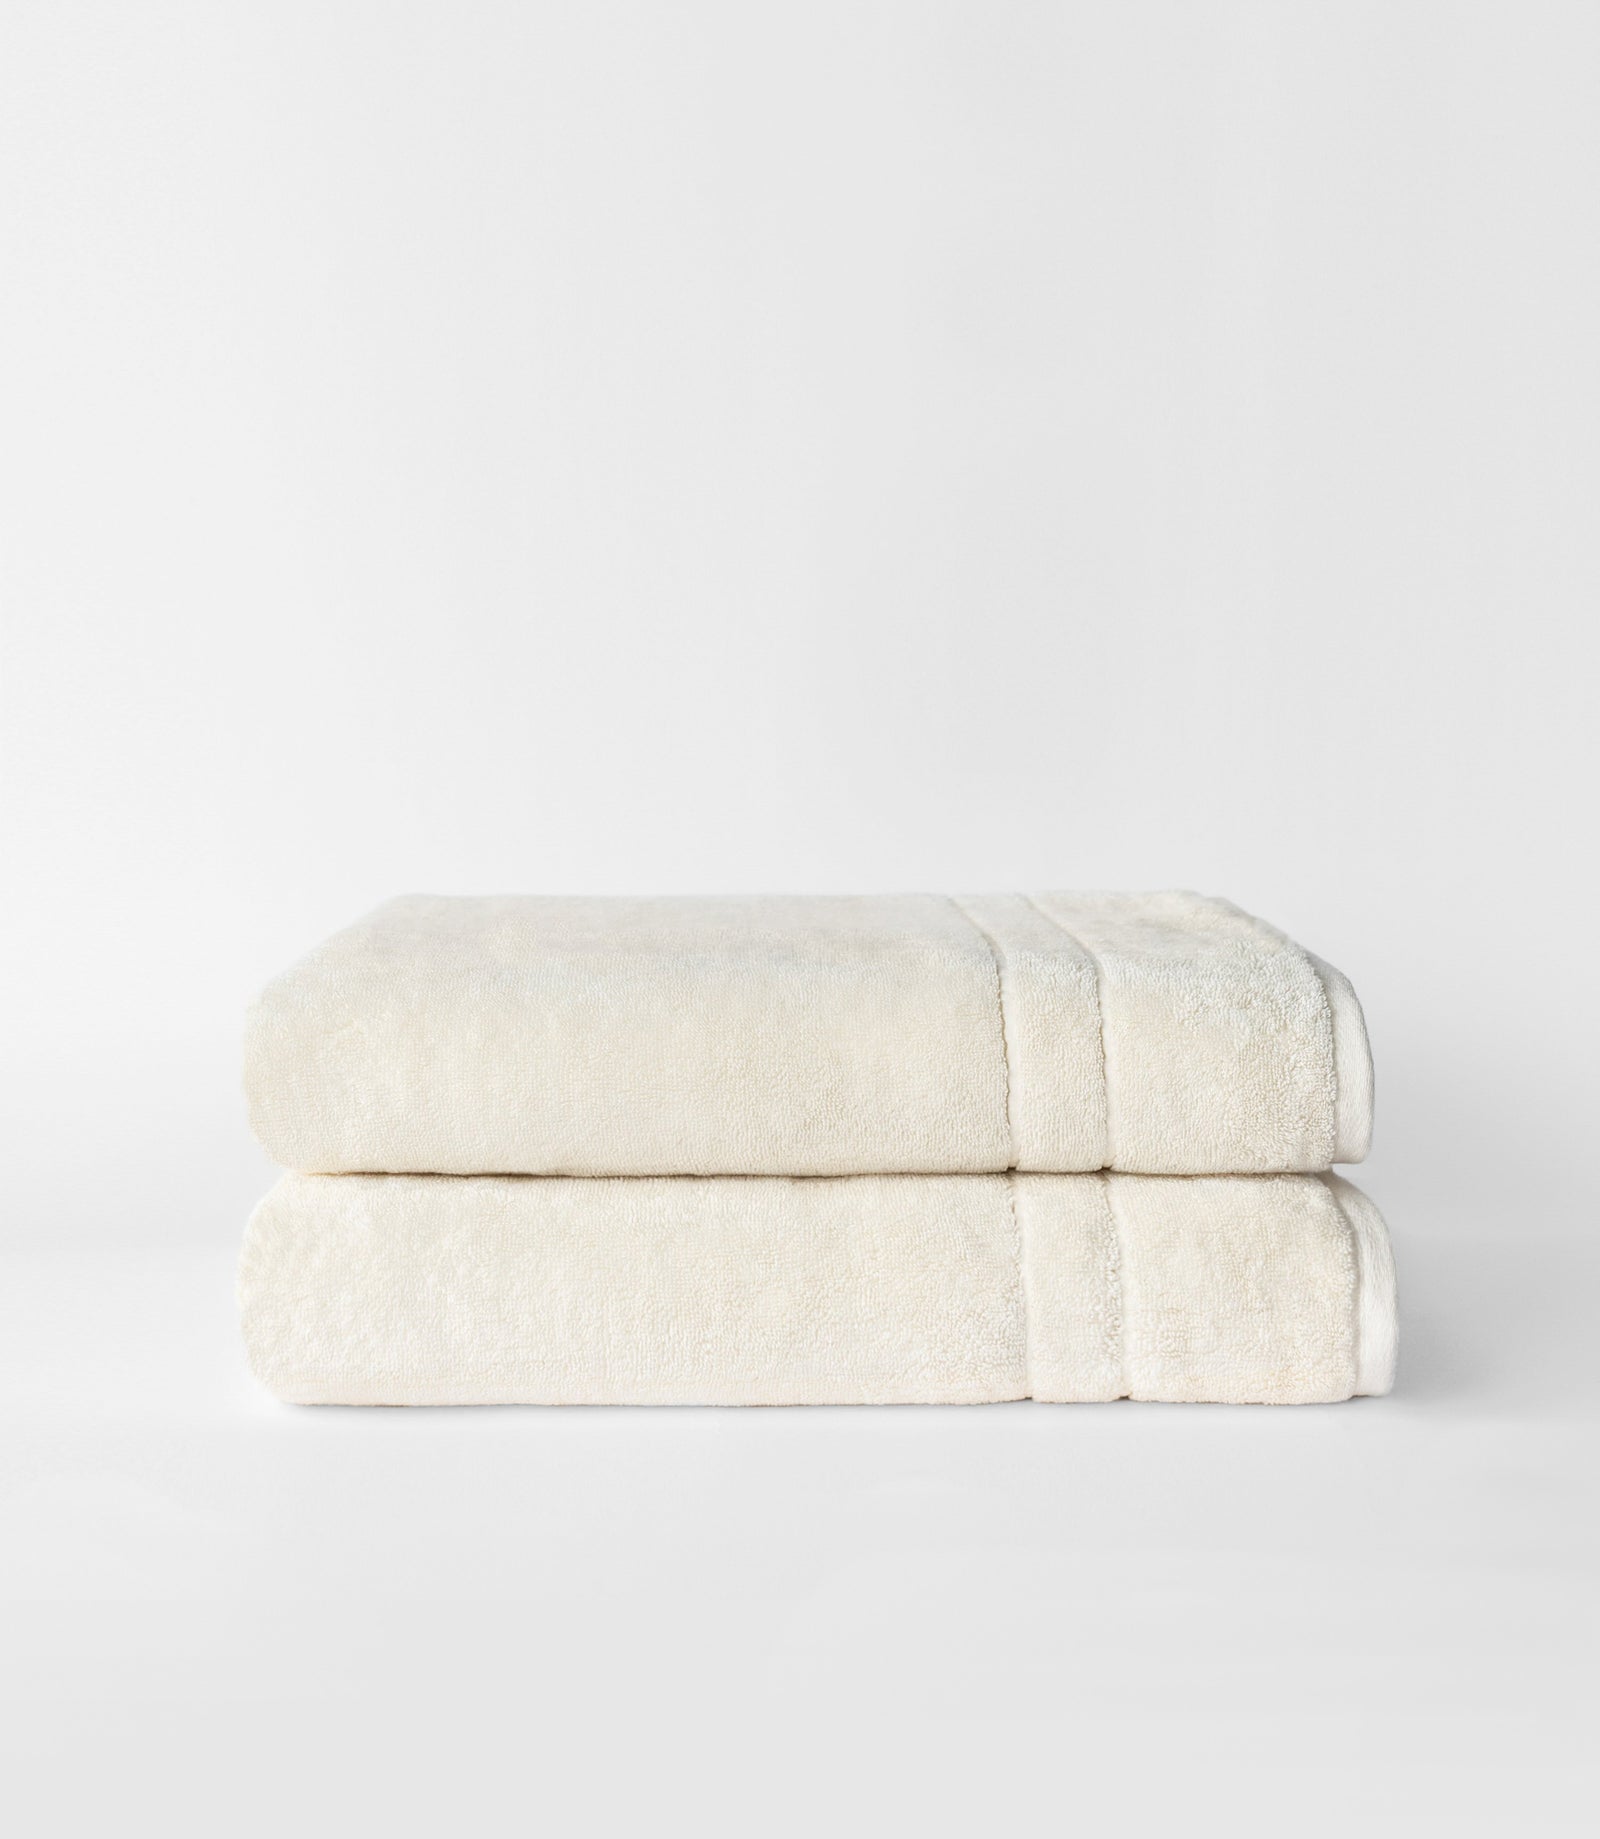 Premium Plush Bath Sheets in the color creme. Photo of bath sheets taken with white background 